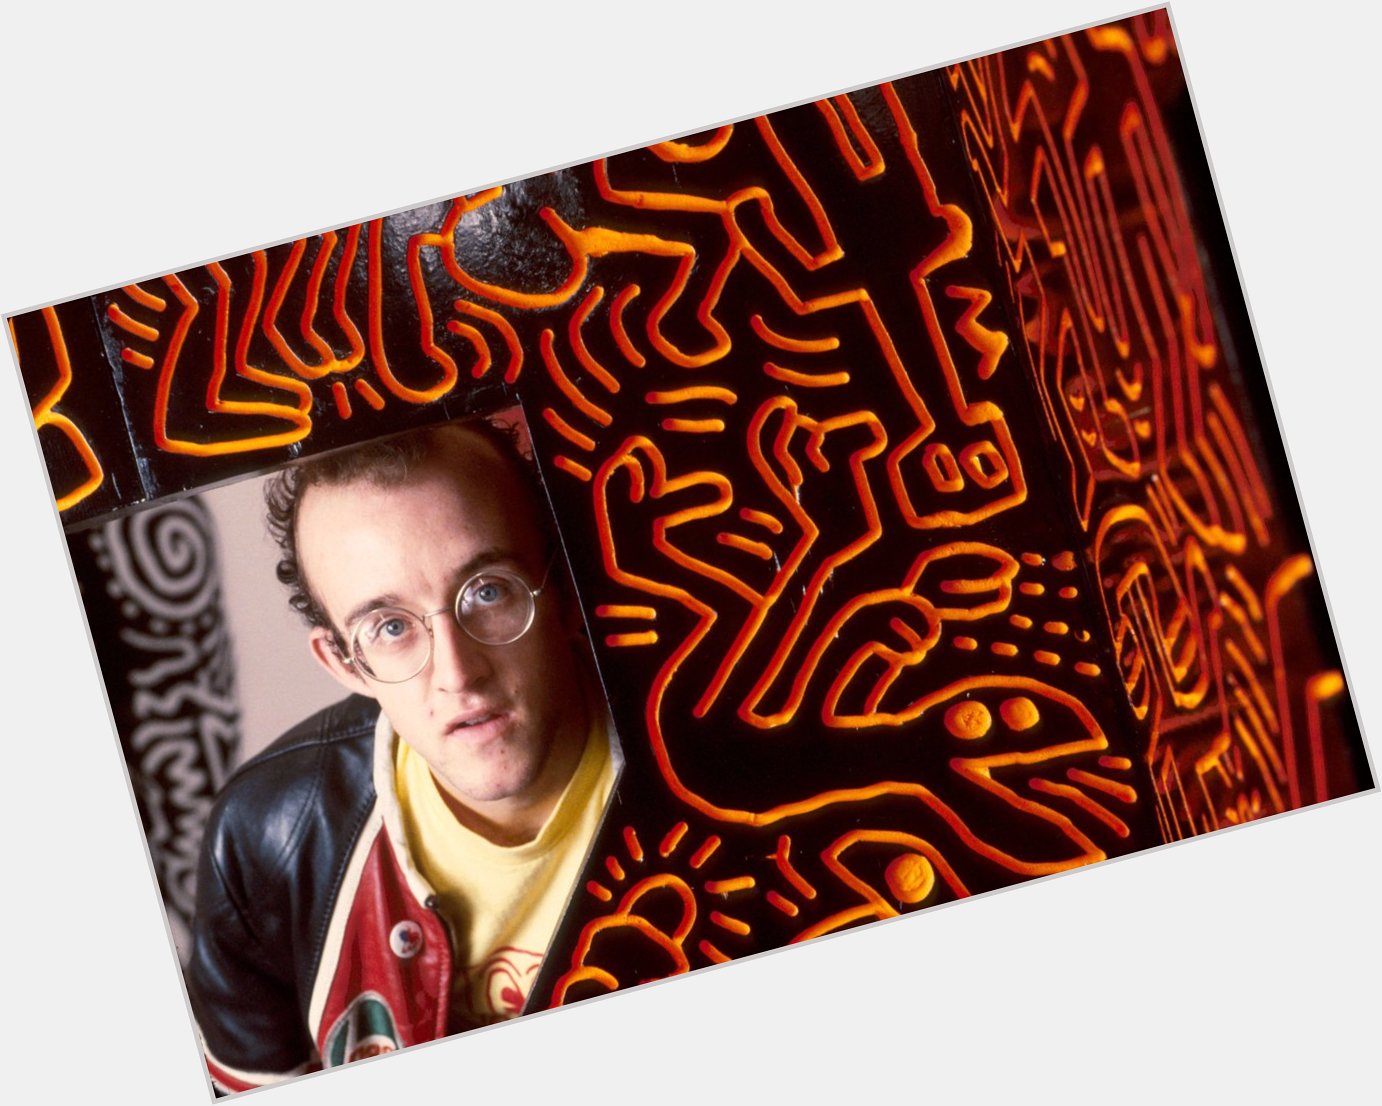 Happy birthday to Keith Haring, an activist and an artist the world misses greatly. 